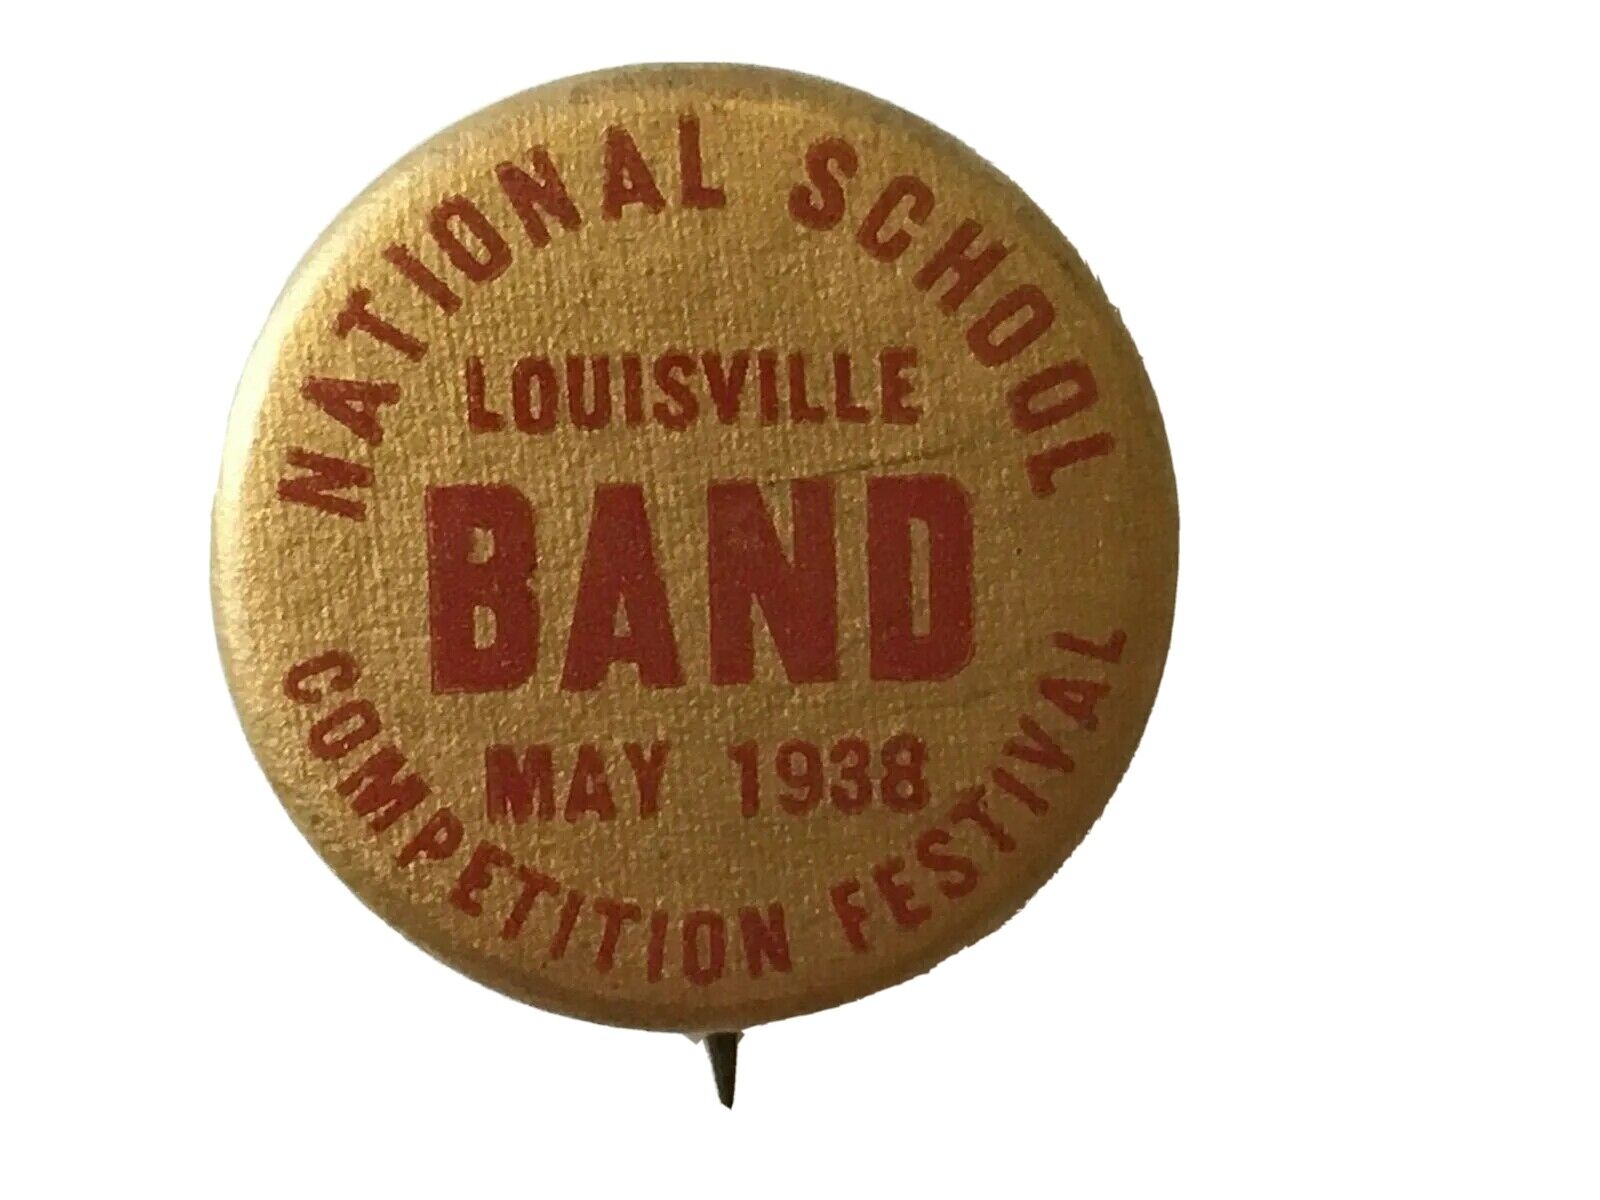 May 1938 Louisville Band National School 3/4 Inch Pinback Button Vintage Rare